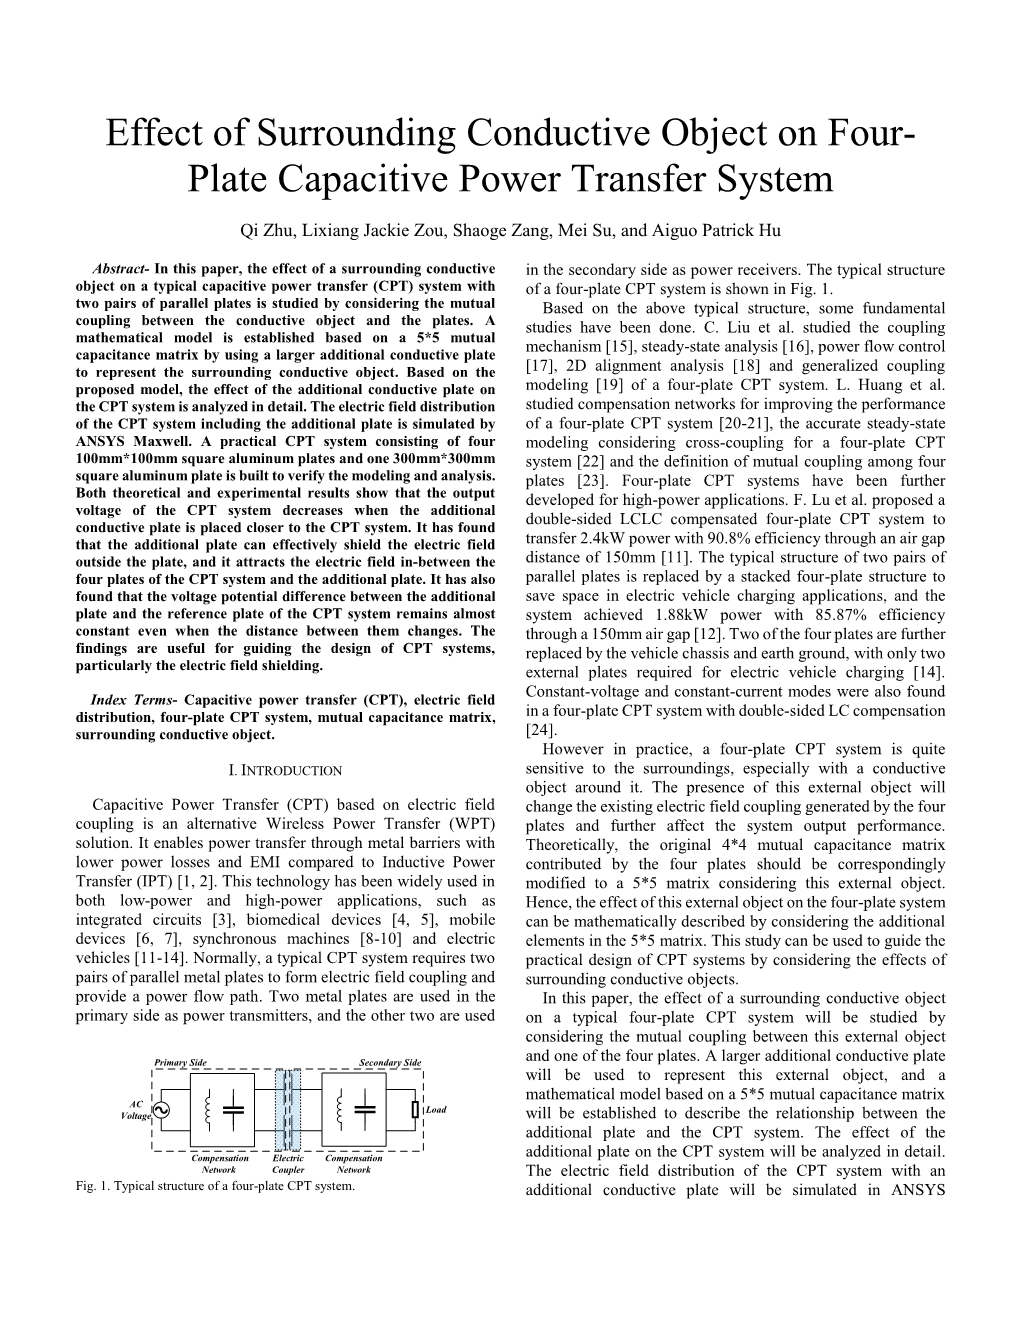 Effect of Surrounding Conductive Object on Four-Plate Capacitive